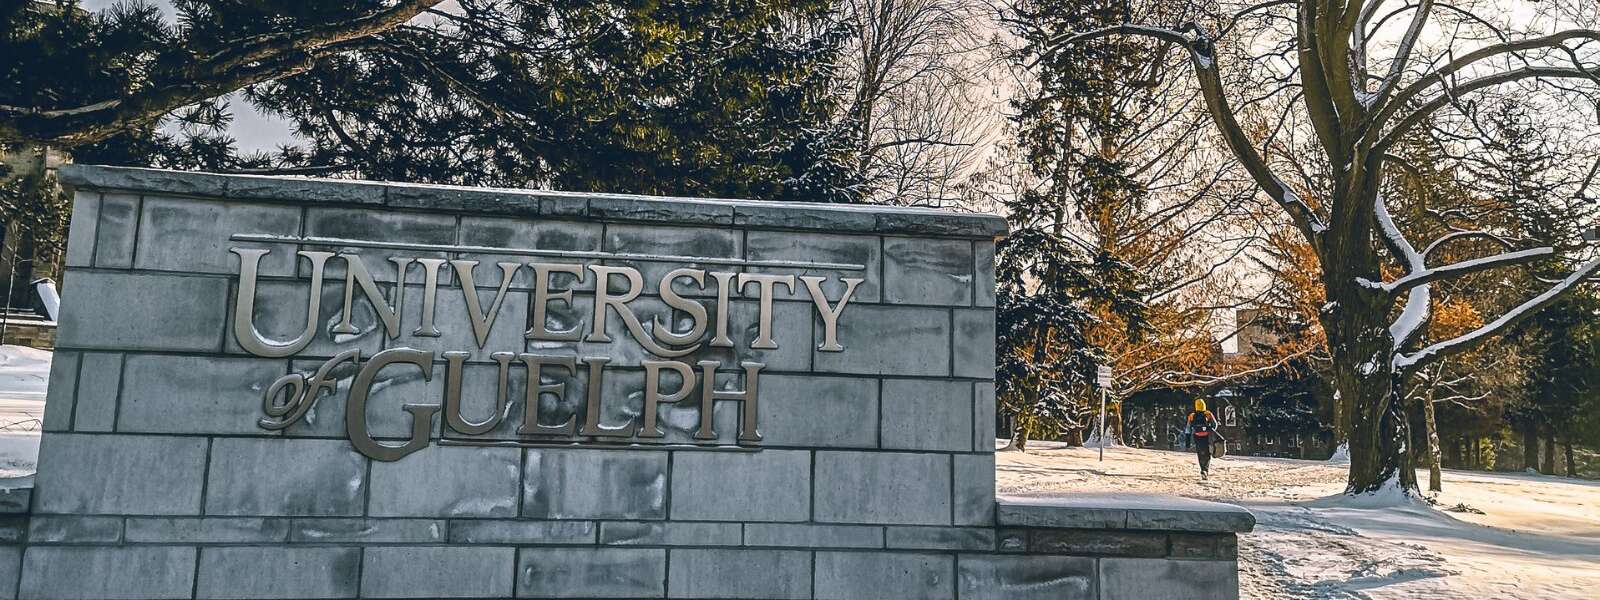 University of Guelph sign on a concrete wall on a snowy day